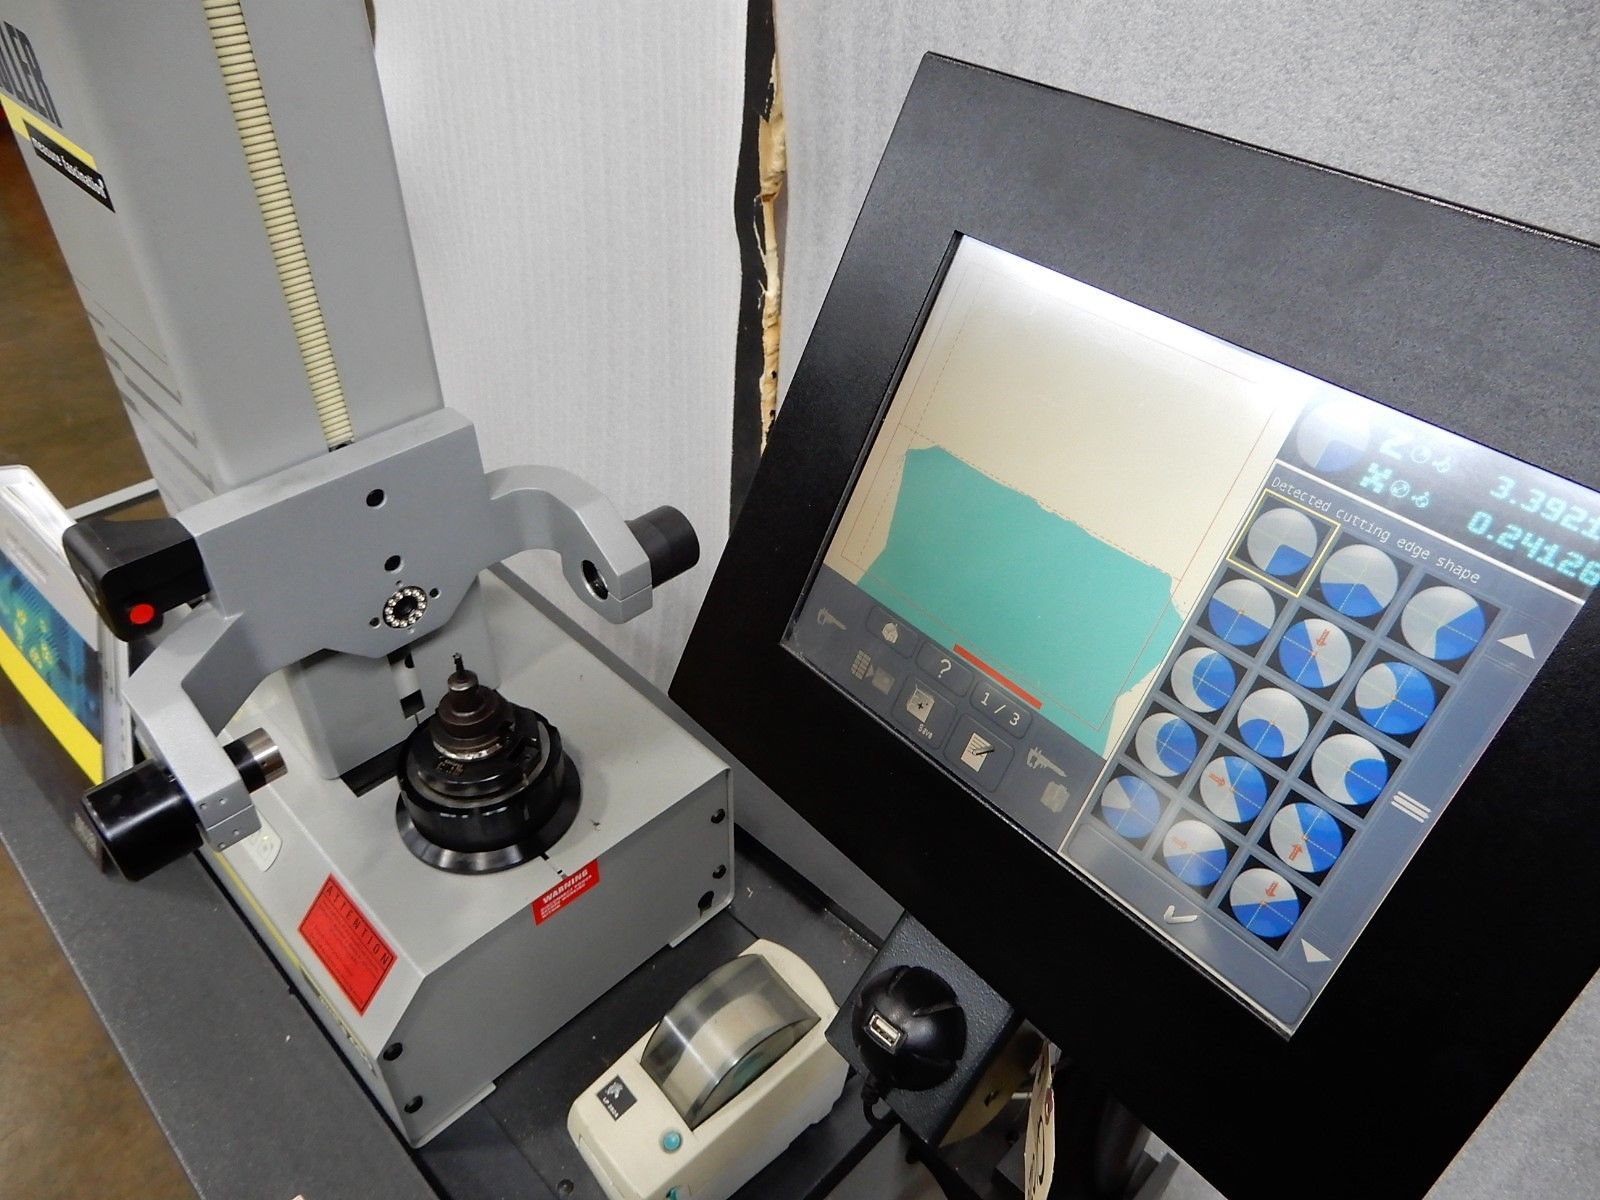 Zoller Smile 400 Tool Presetter For Sale, Zoller Touch Screen Control, Z-axis = 15.7” For Sale